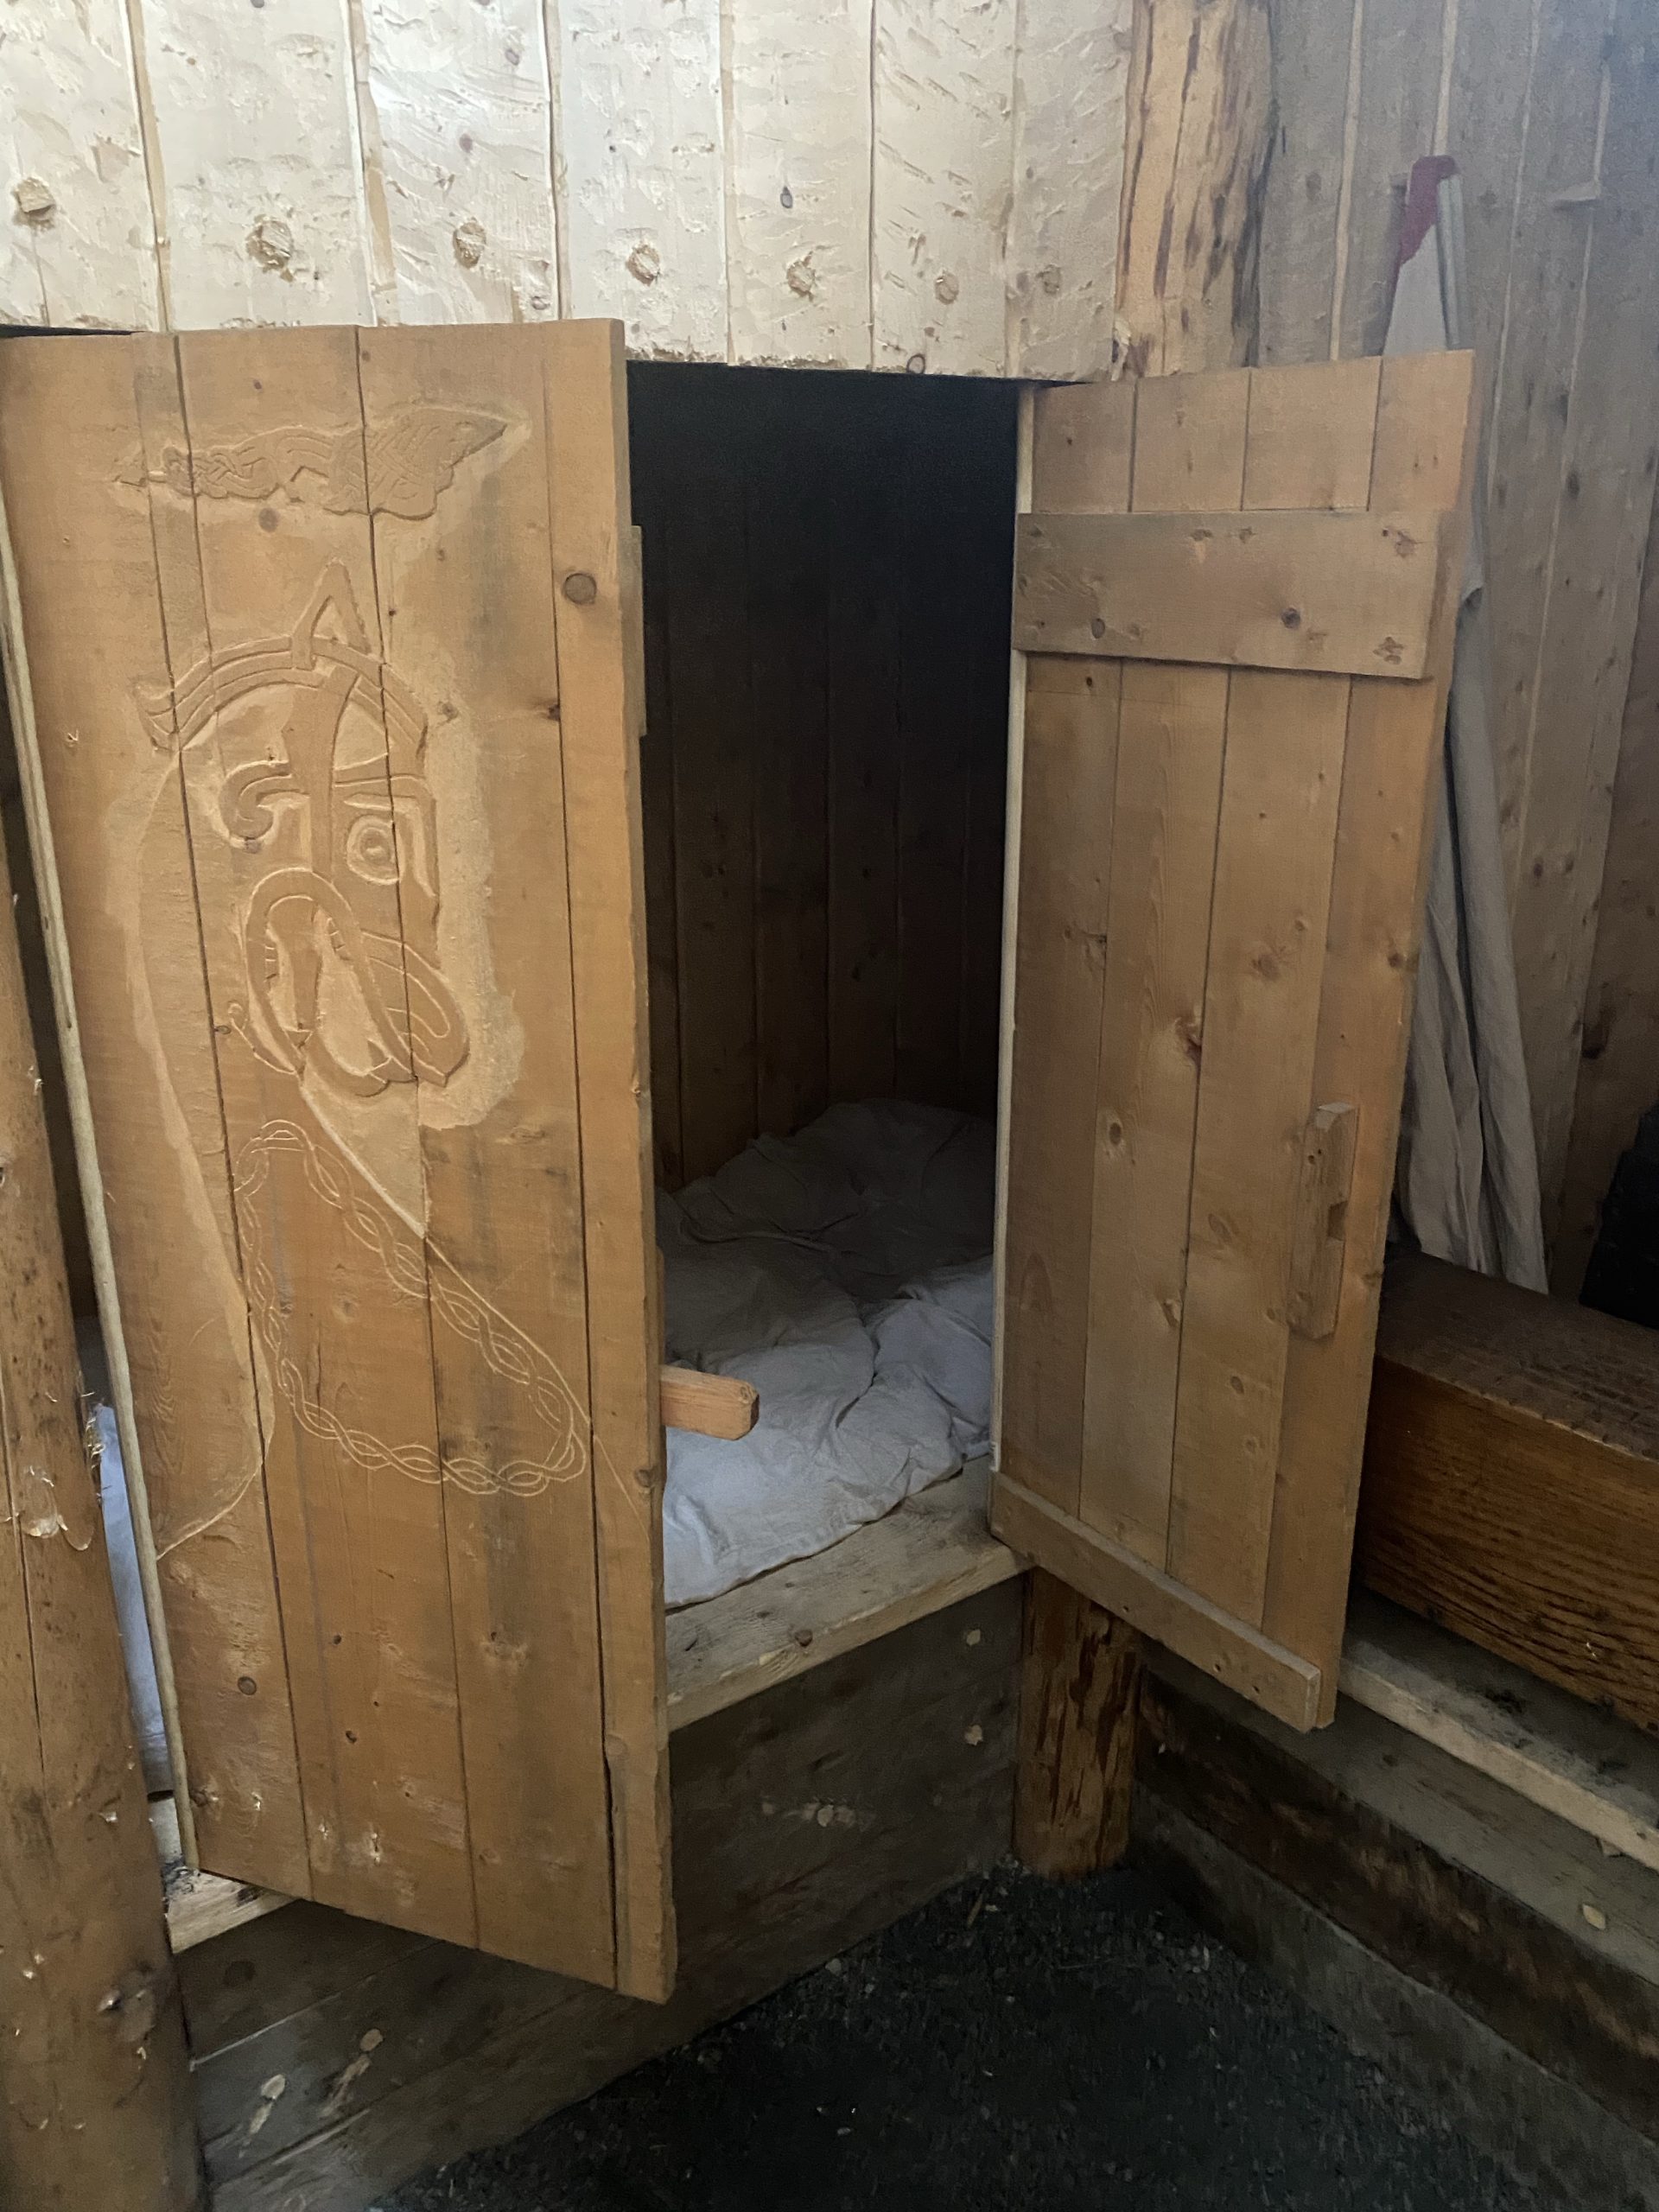 A typical Norse sleeping bunk in a recreation of a 1,000 year old sod house.